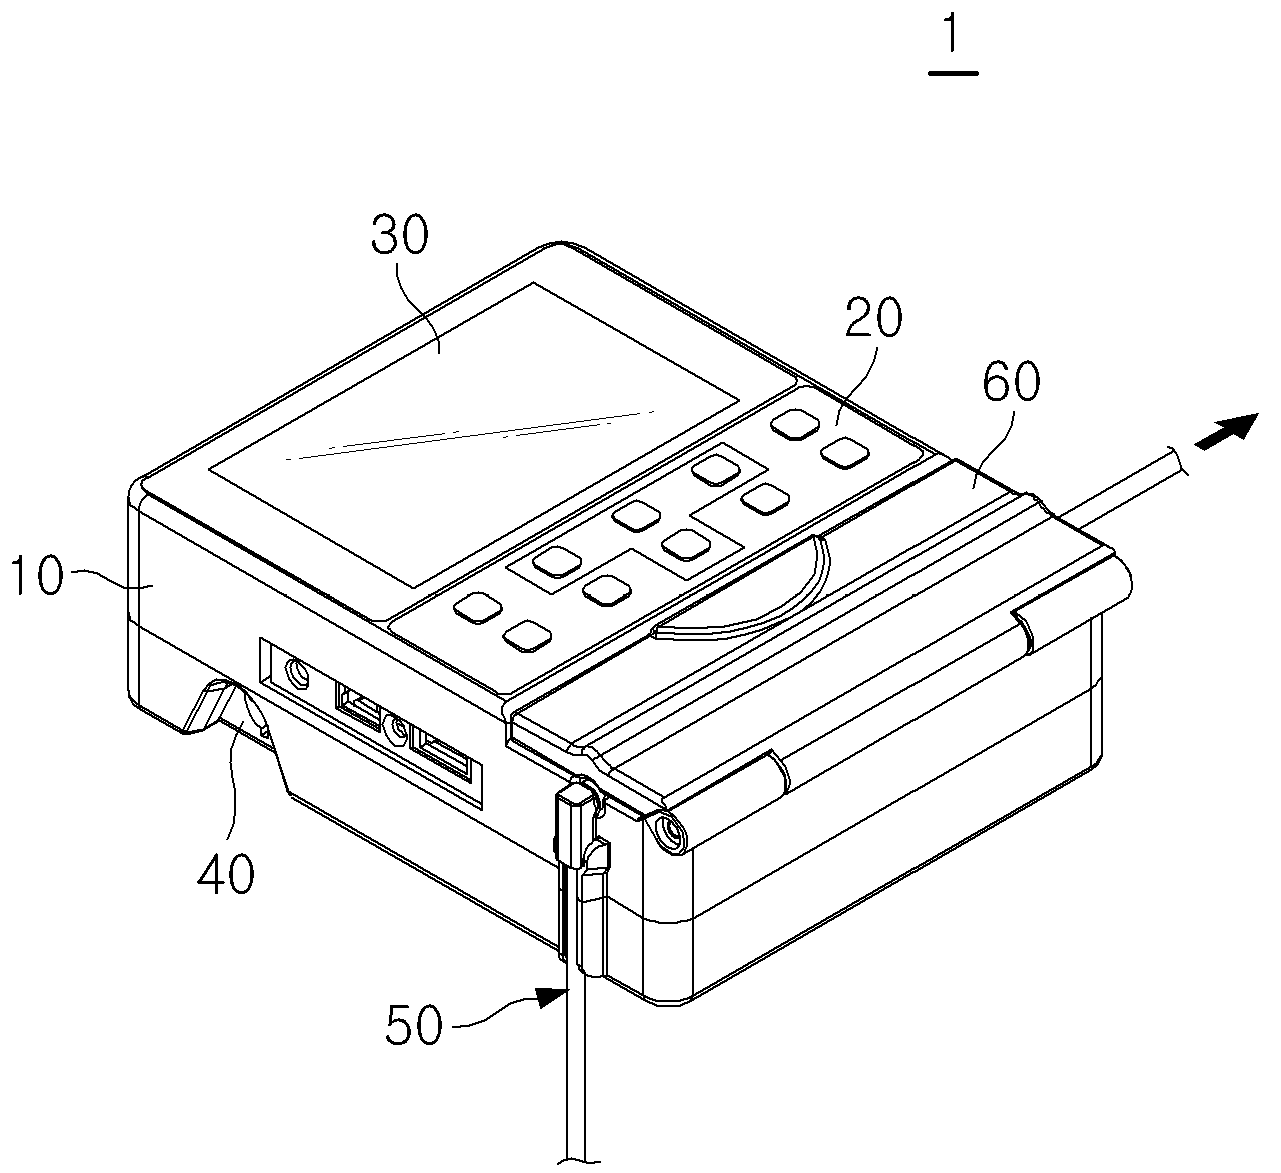 Method for managing history of liquid medicine injections